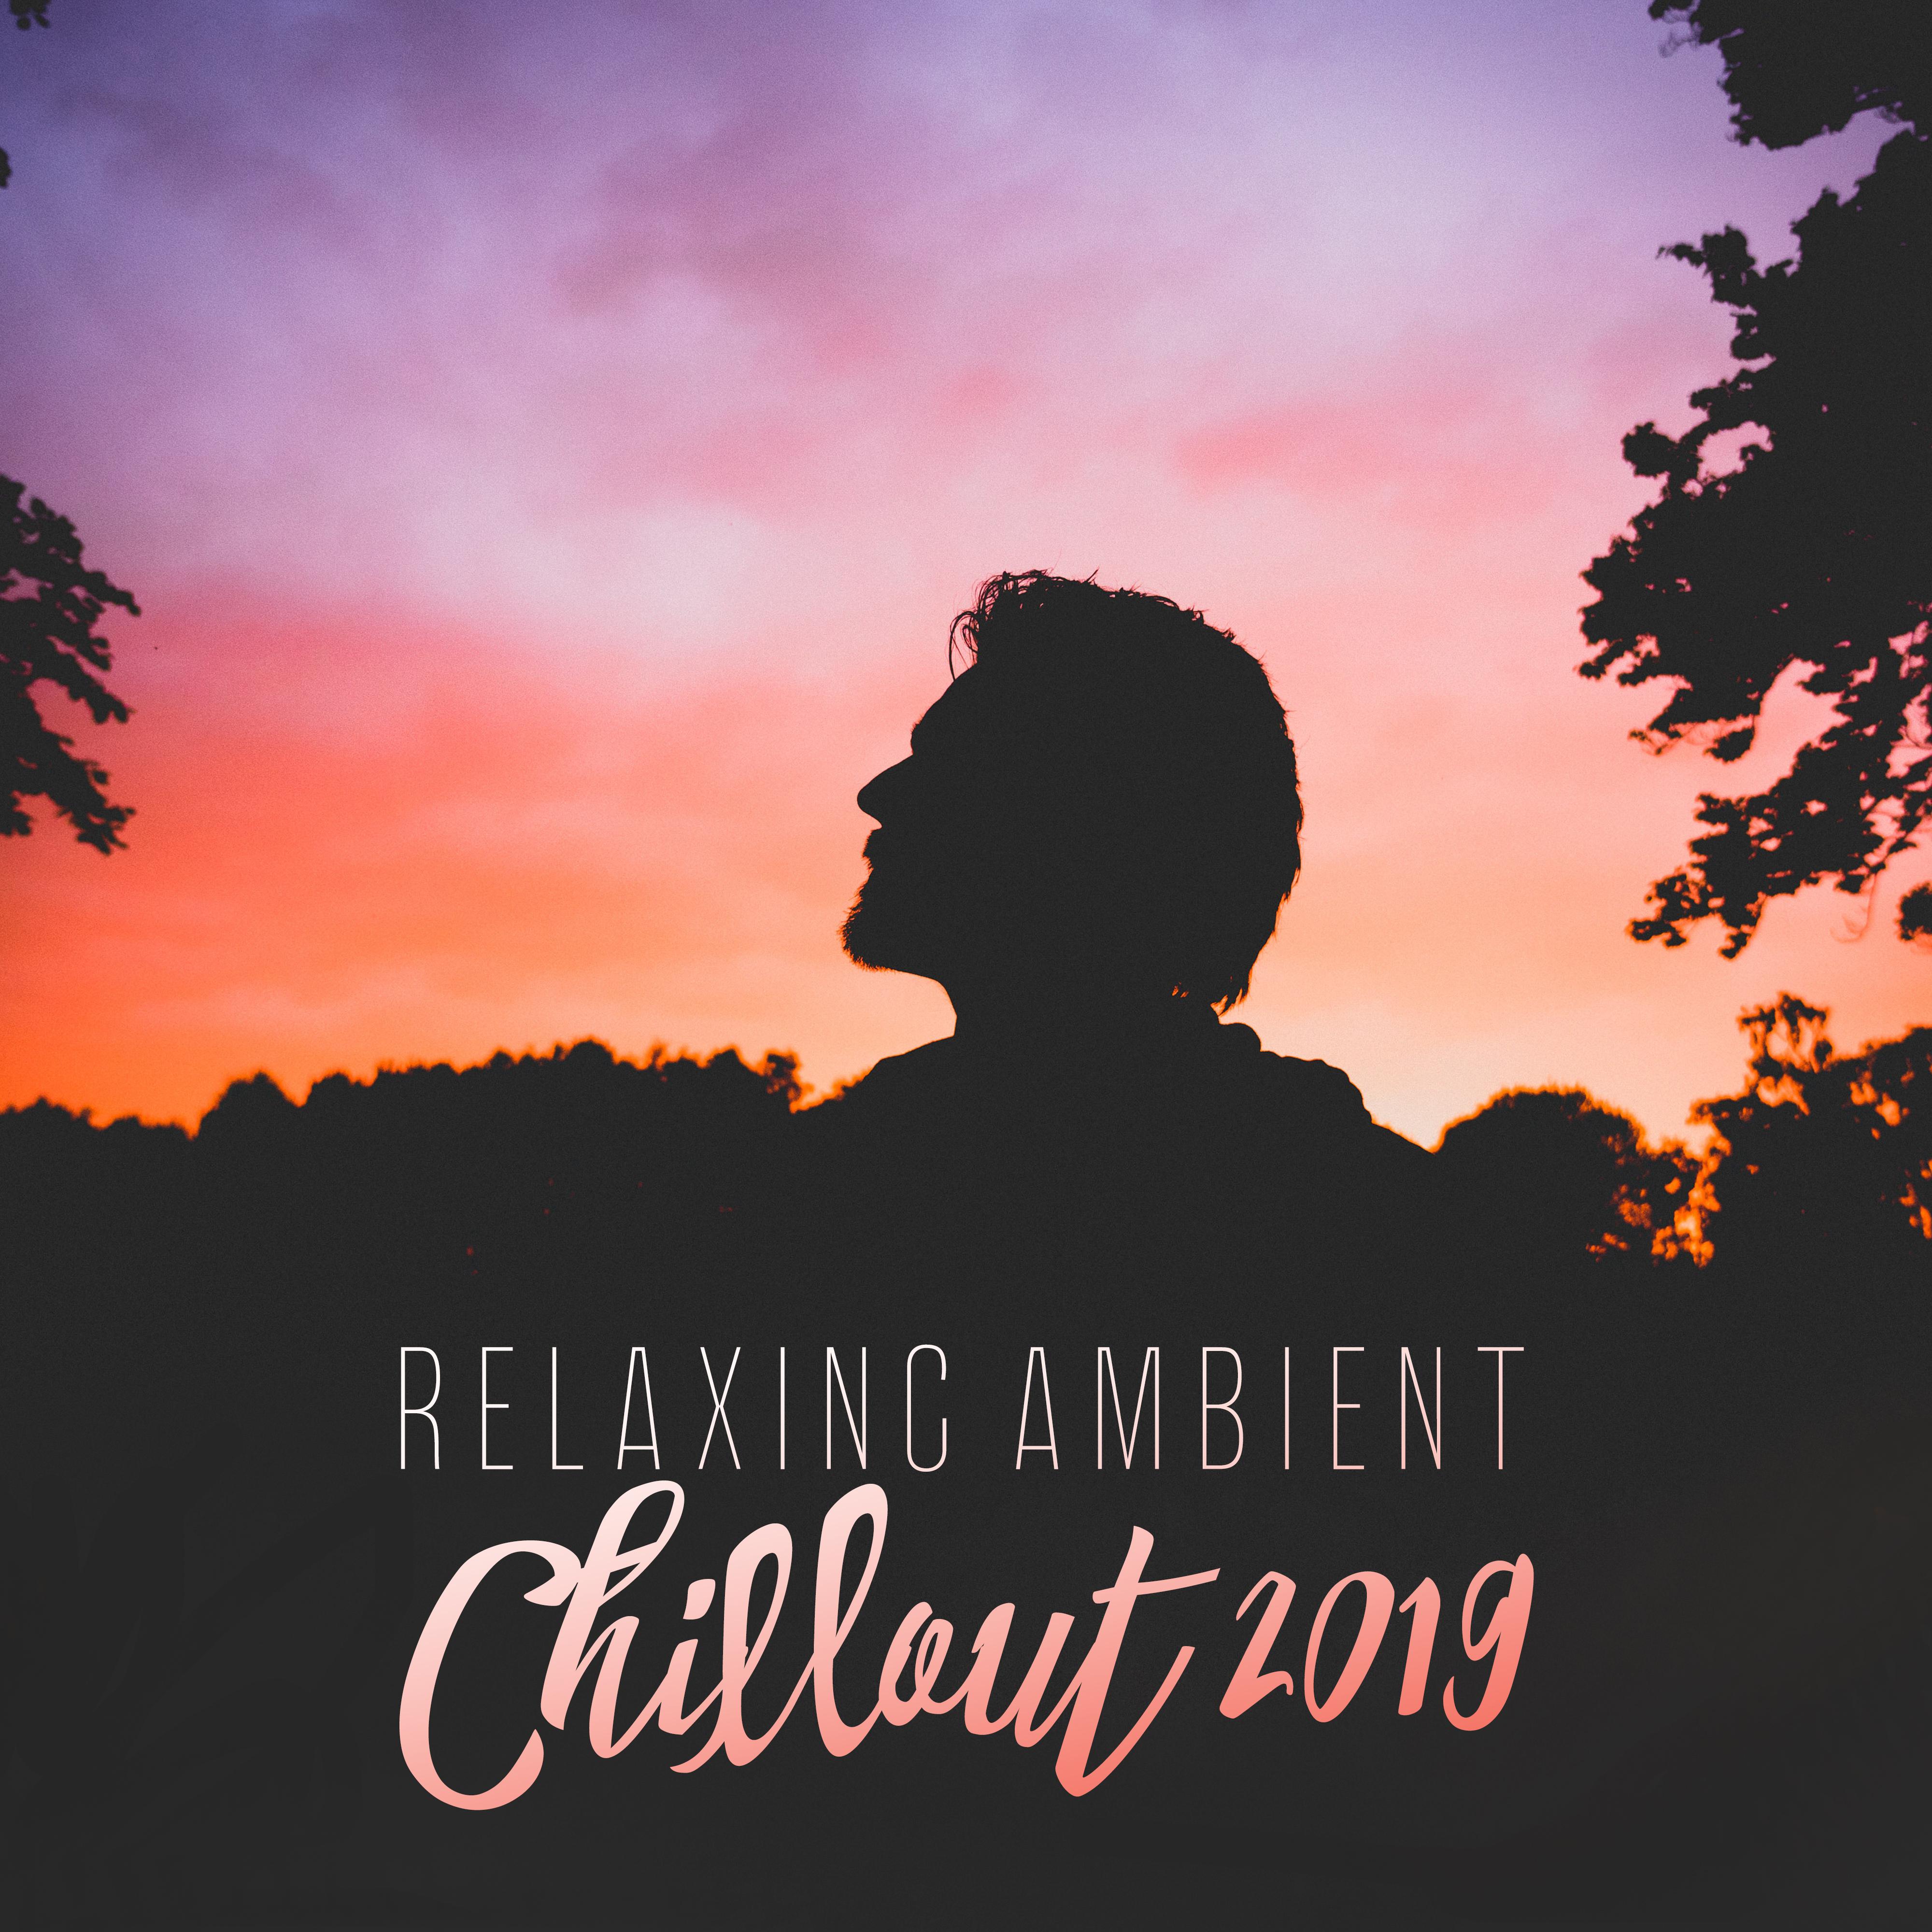 Relaxing Ambient Chillout 2019  Ibiza Chill Out, Chillout Relaxing Melodies, Beach Lounge, Deep Chill Vibes, Summertime 2019, Reduce Stress, Ambient Music